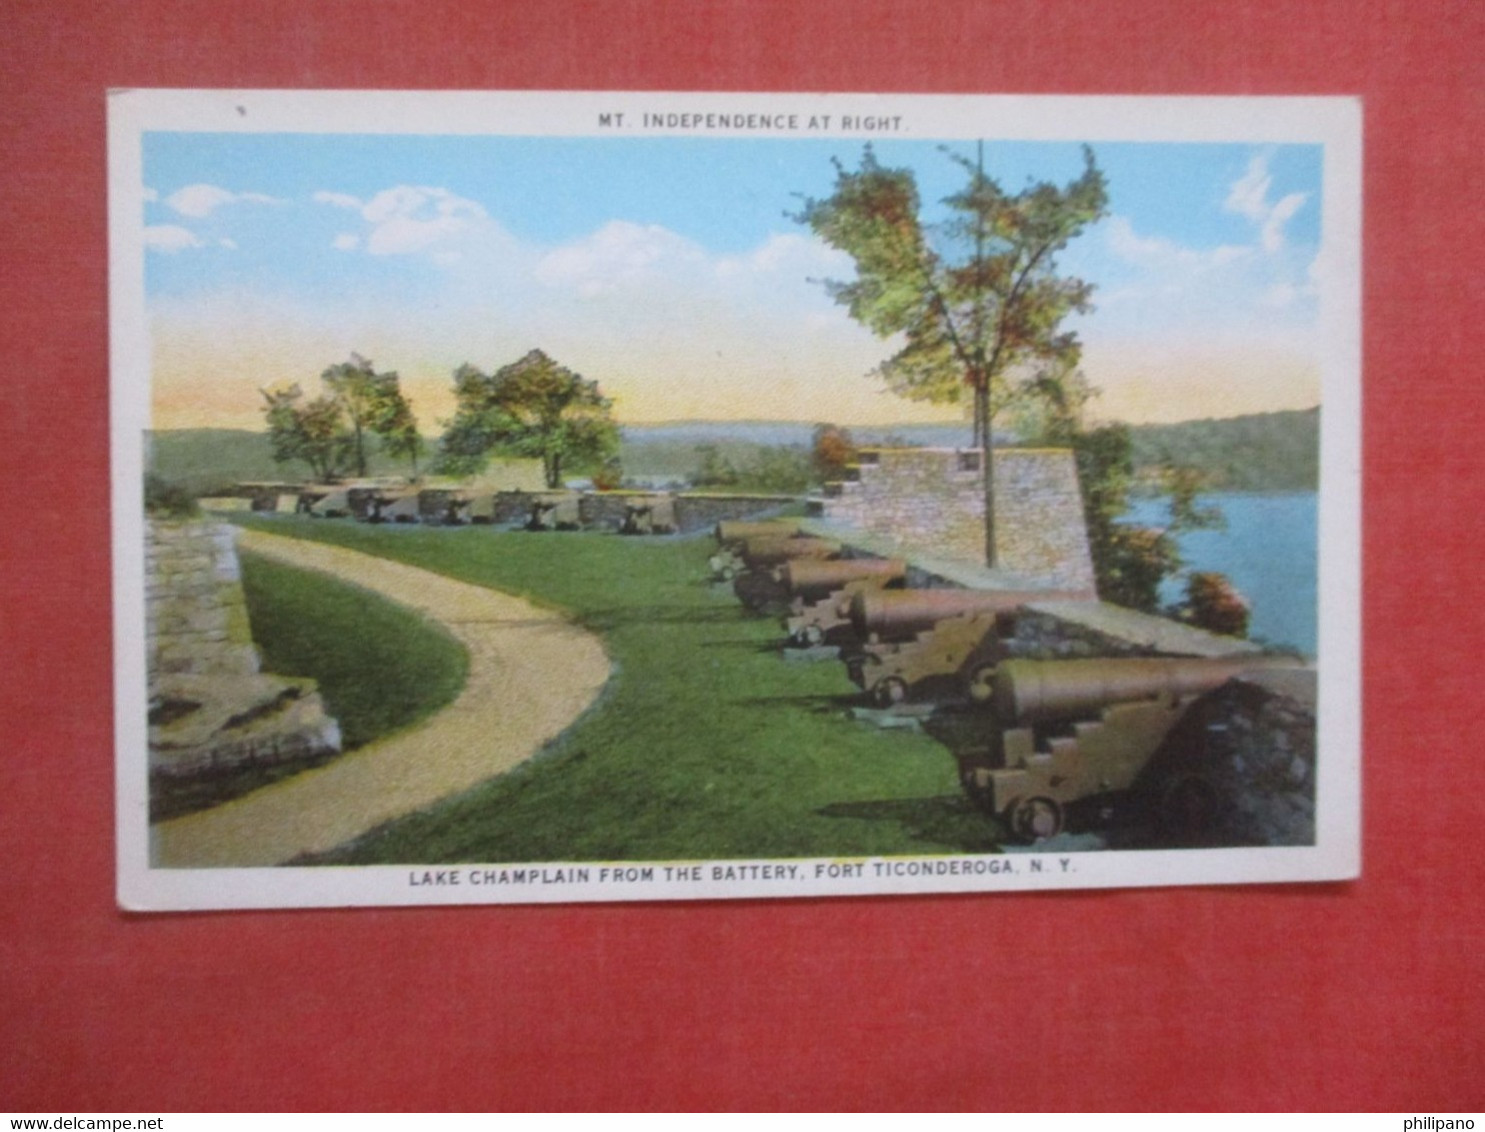 Lake Champlain From The Battery   Fort Ticonderoga  - New York  Ref 4417 - Albany